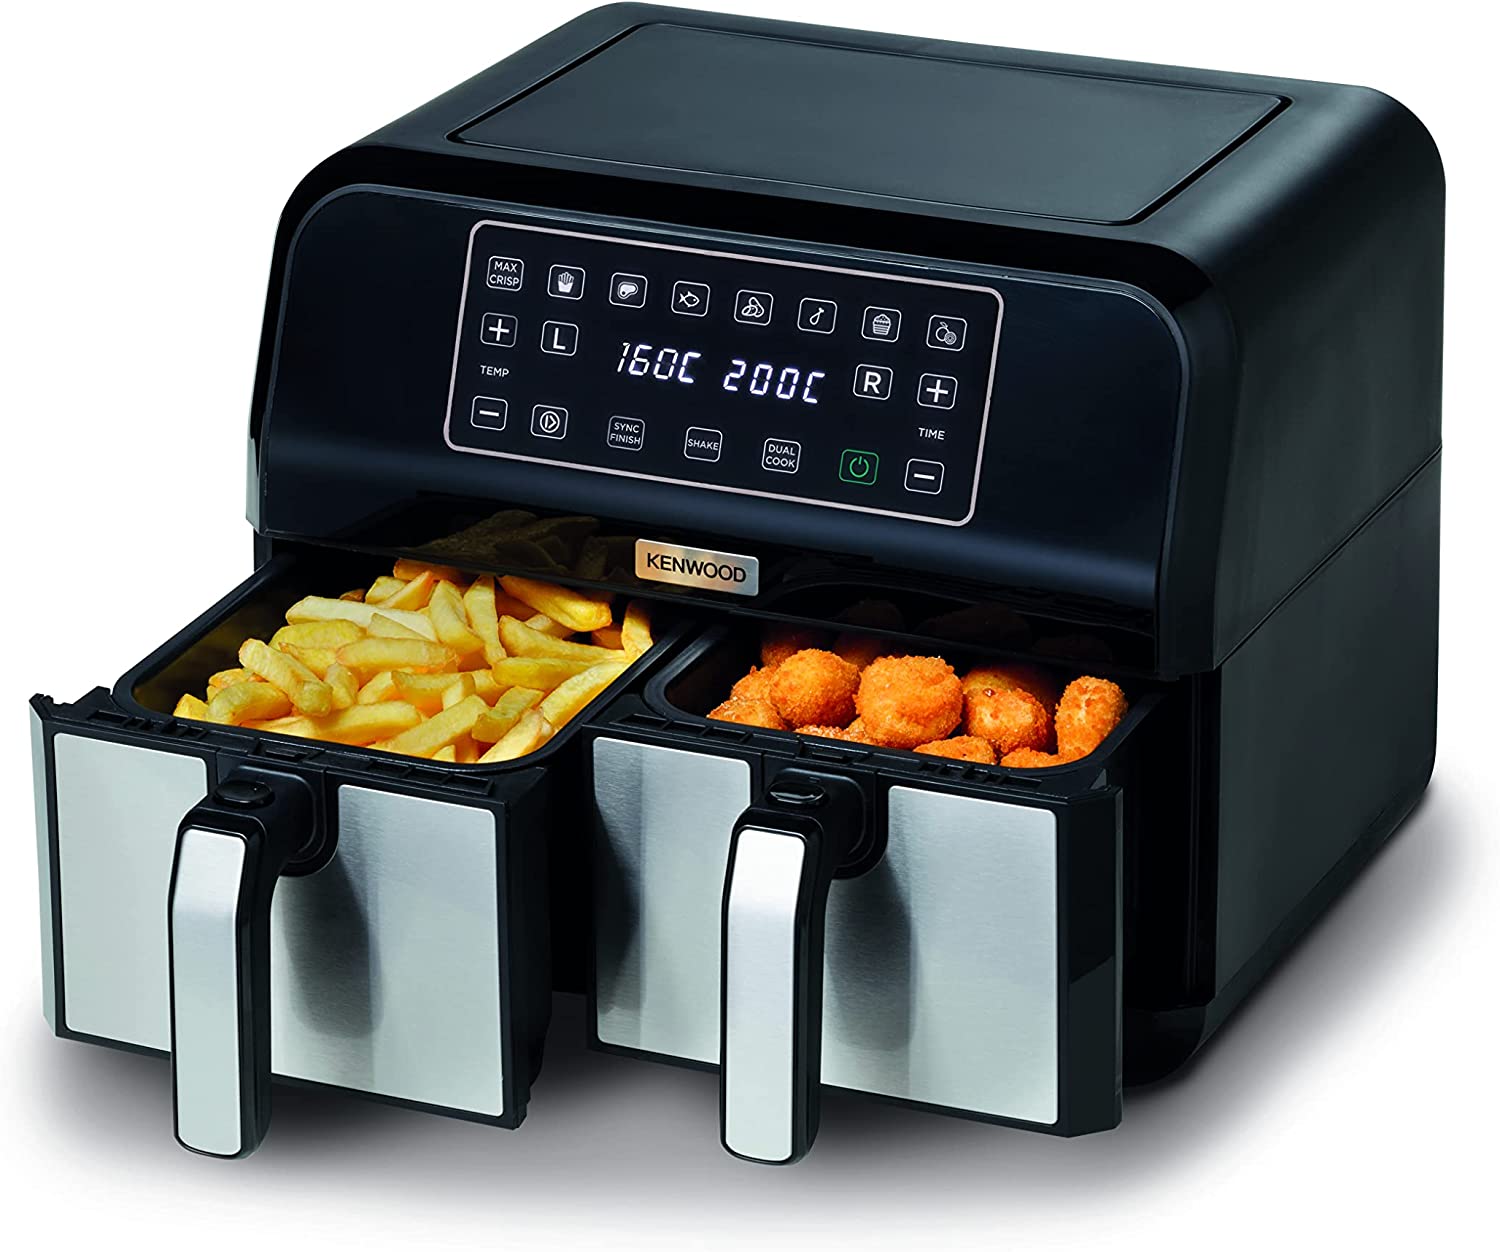 Kenwood Digital Twin XXXL Air Fryer, 8 Liters, Black and Silver - HFM75.000MB Without Warranty